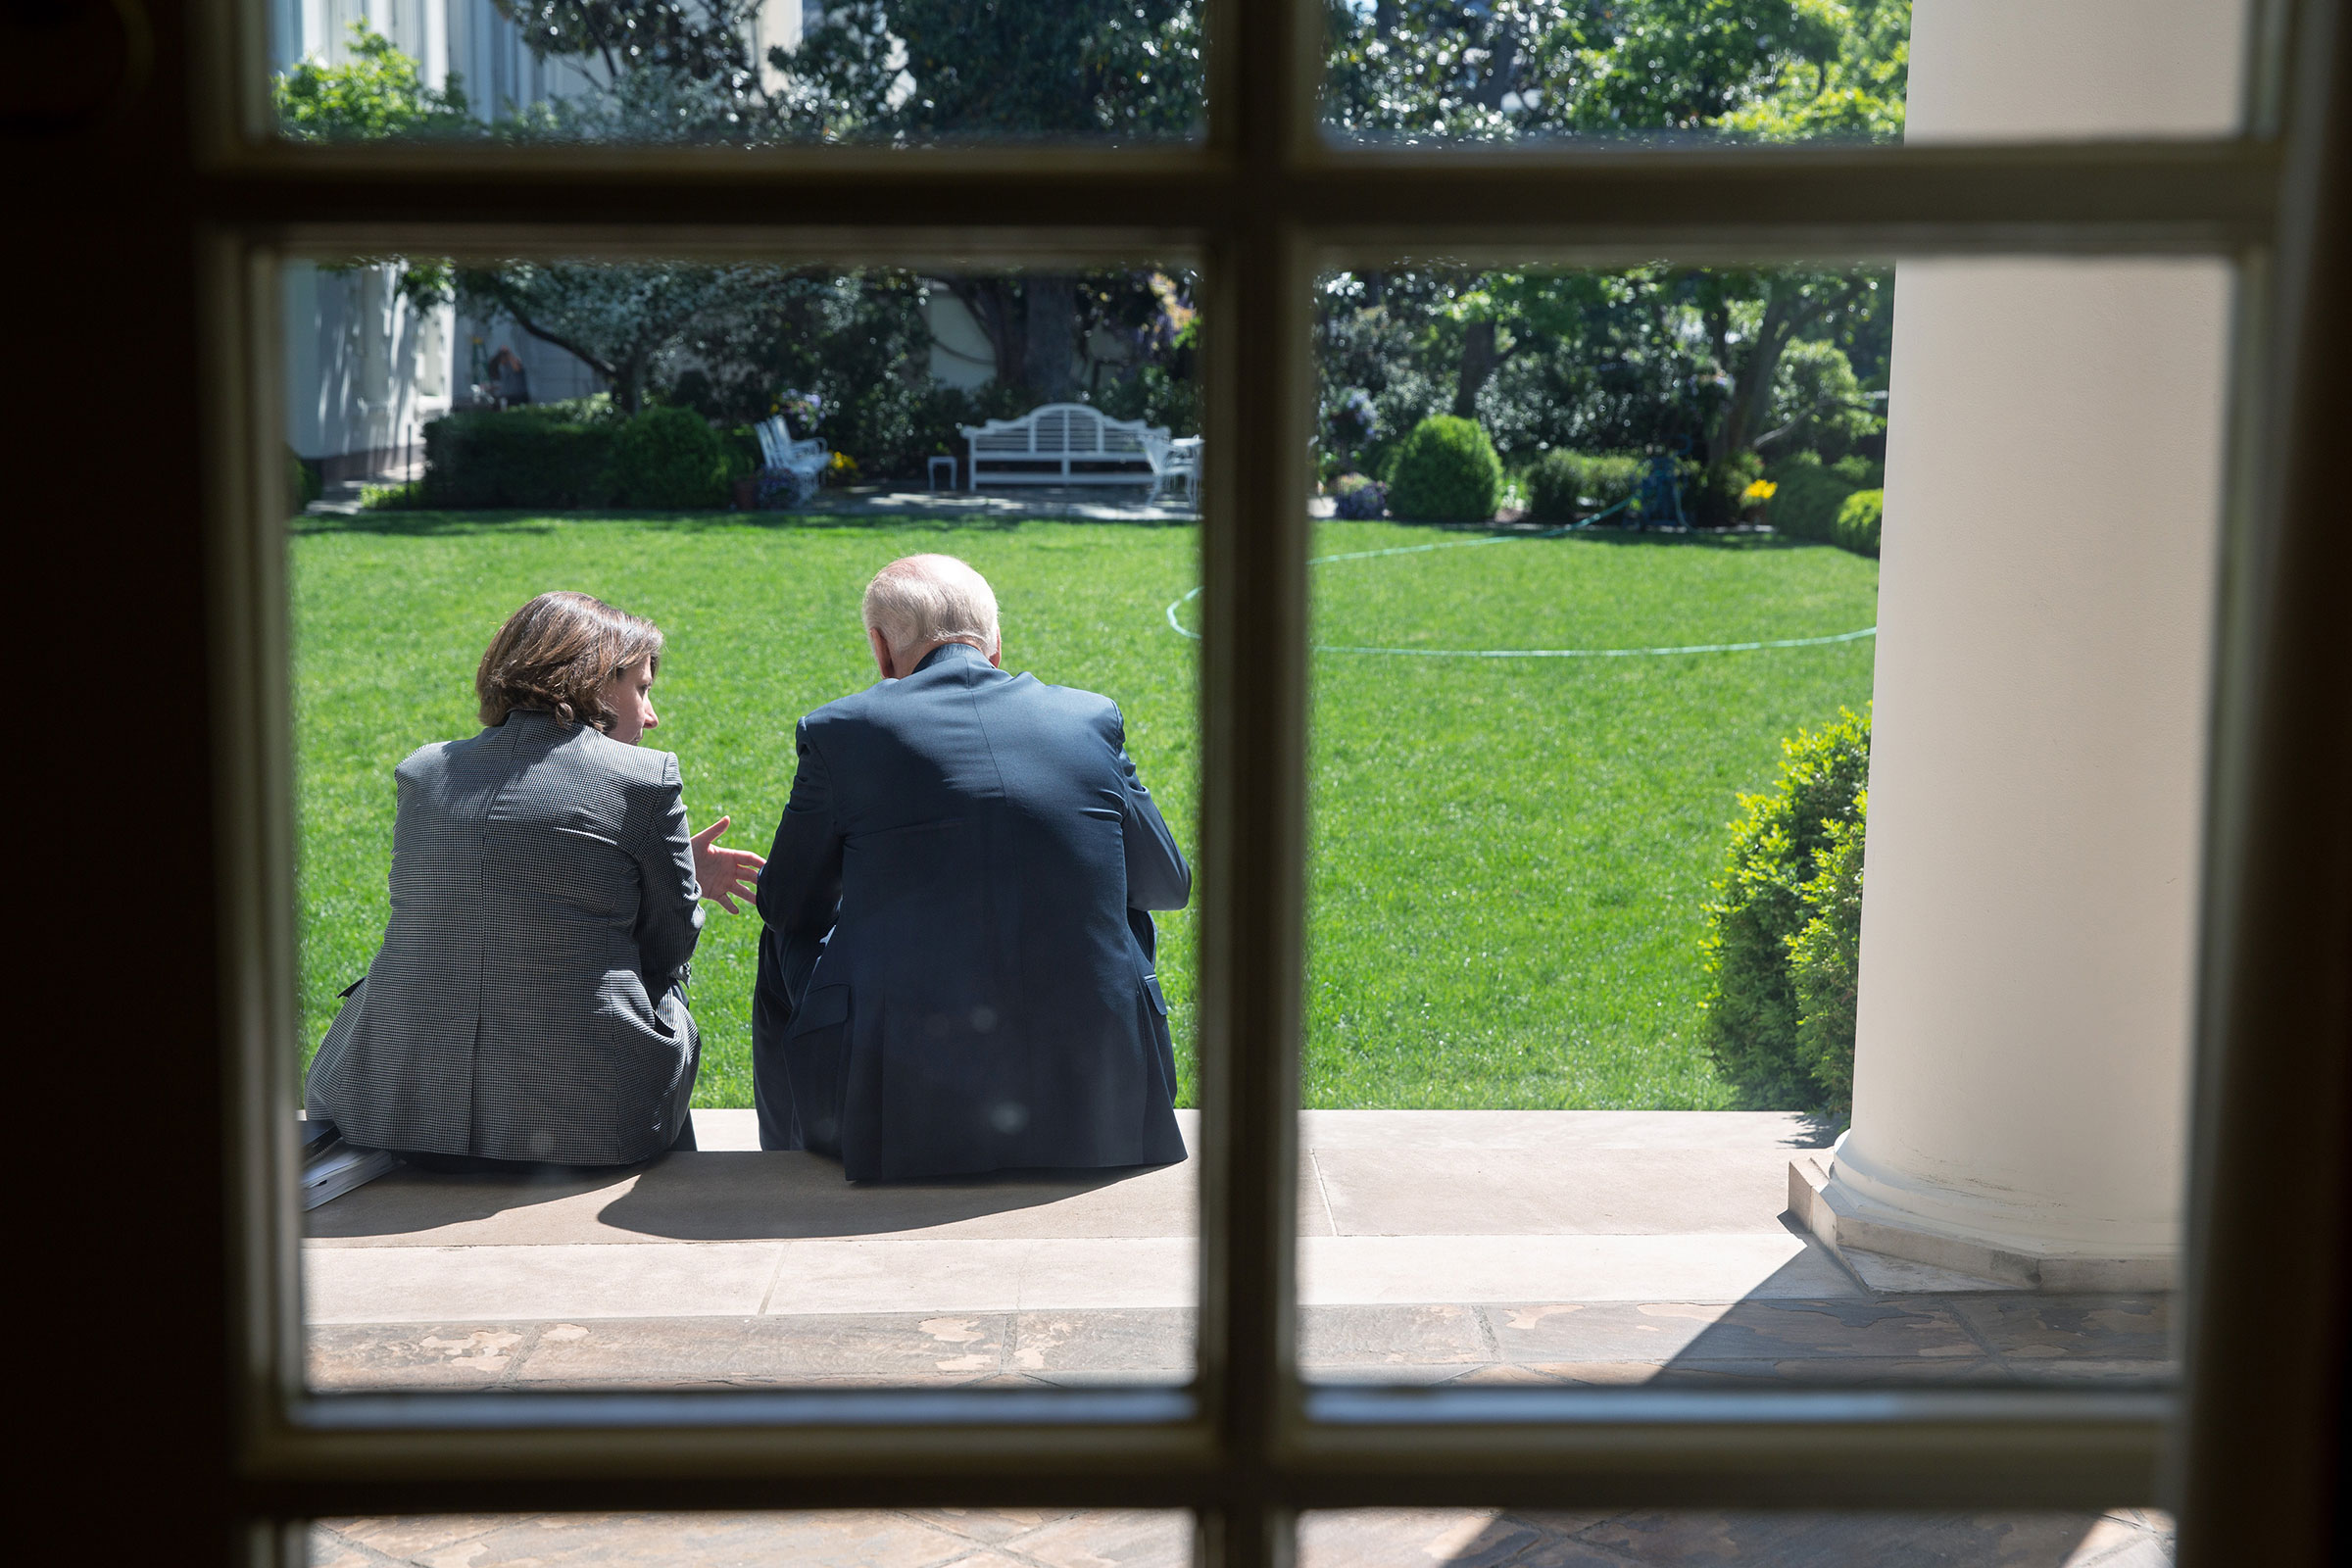 Vice President Joe Biden and Lisa Monaco, Assistant to the President for Homeland Security and Counterterrorism, talk on the steps from the Colonnade to the Rose Garden at the White House following the Presidential Daily Briefing, on May 1, 2013.